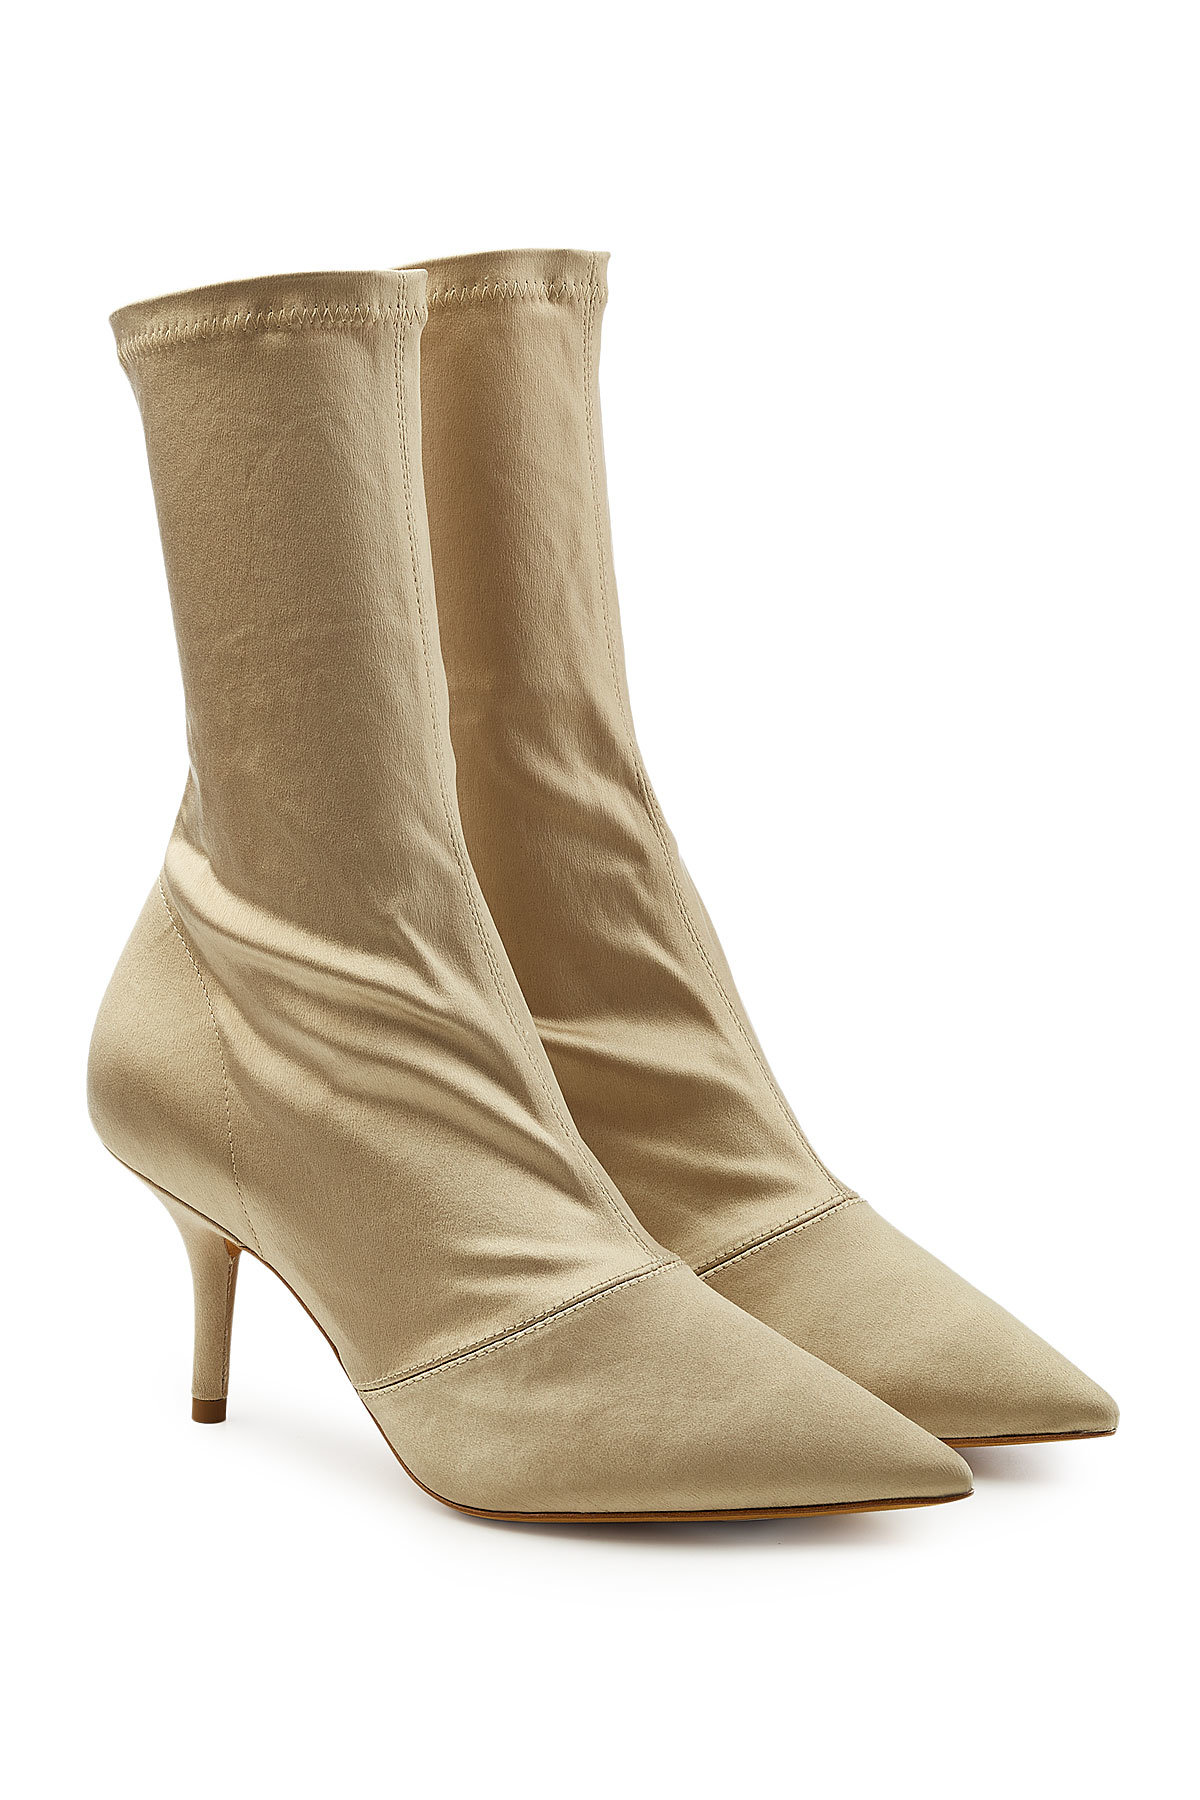 Yeezy - Satin Ankle Boots